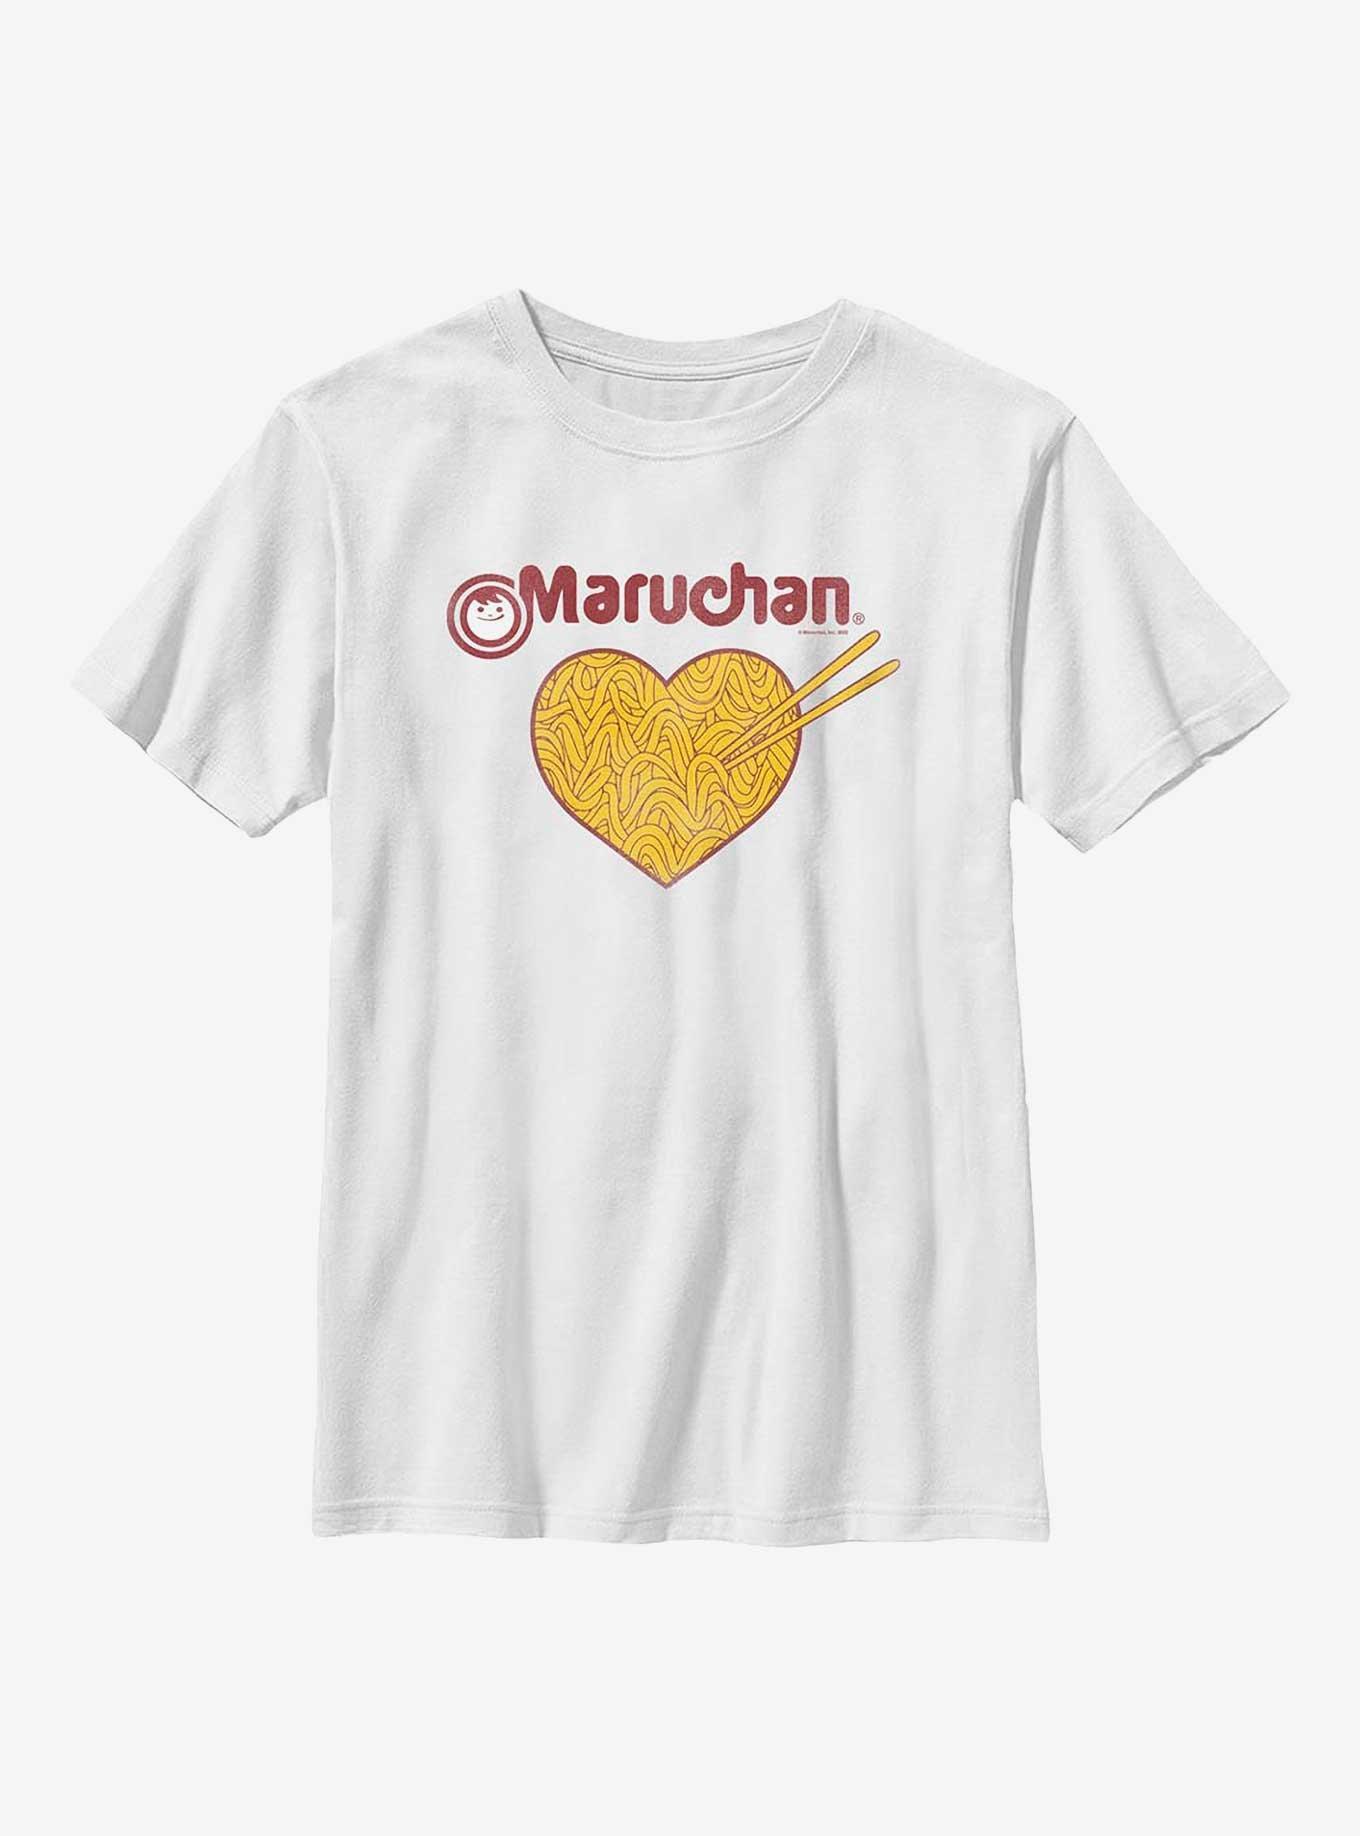 Maruchan Noodles Heart Youth T-Shirt, WHITE, hi-res